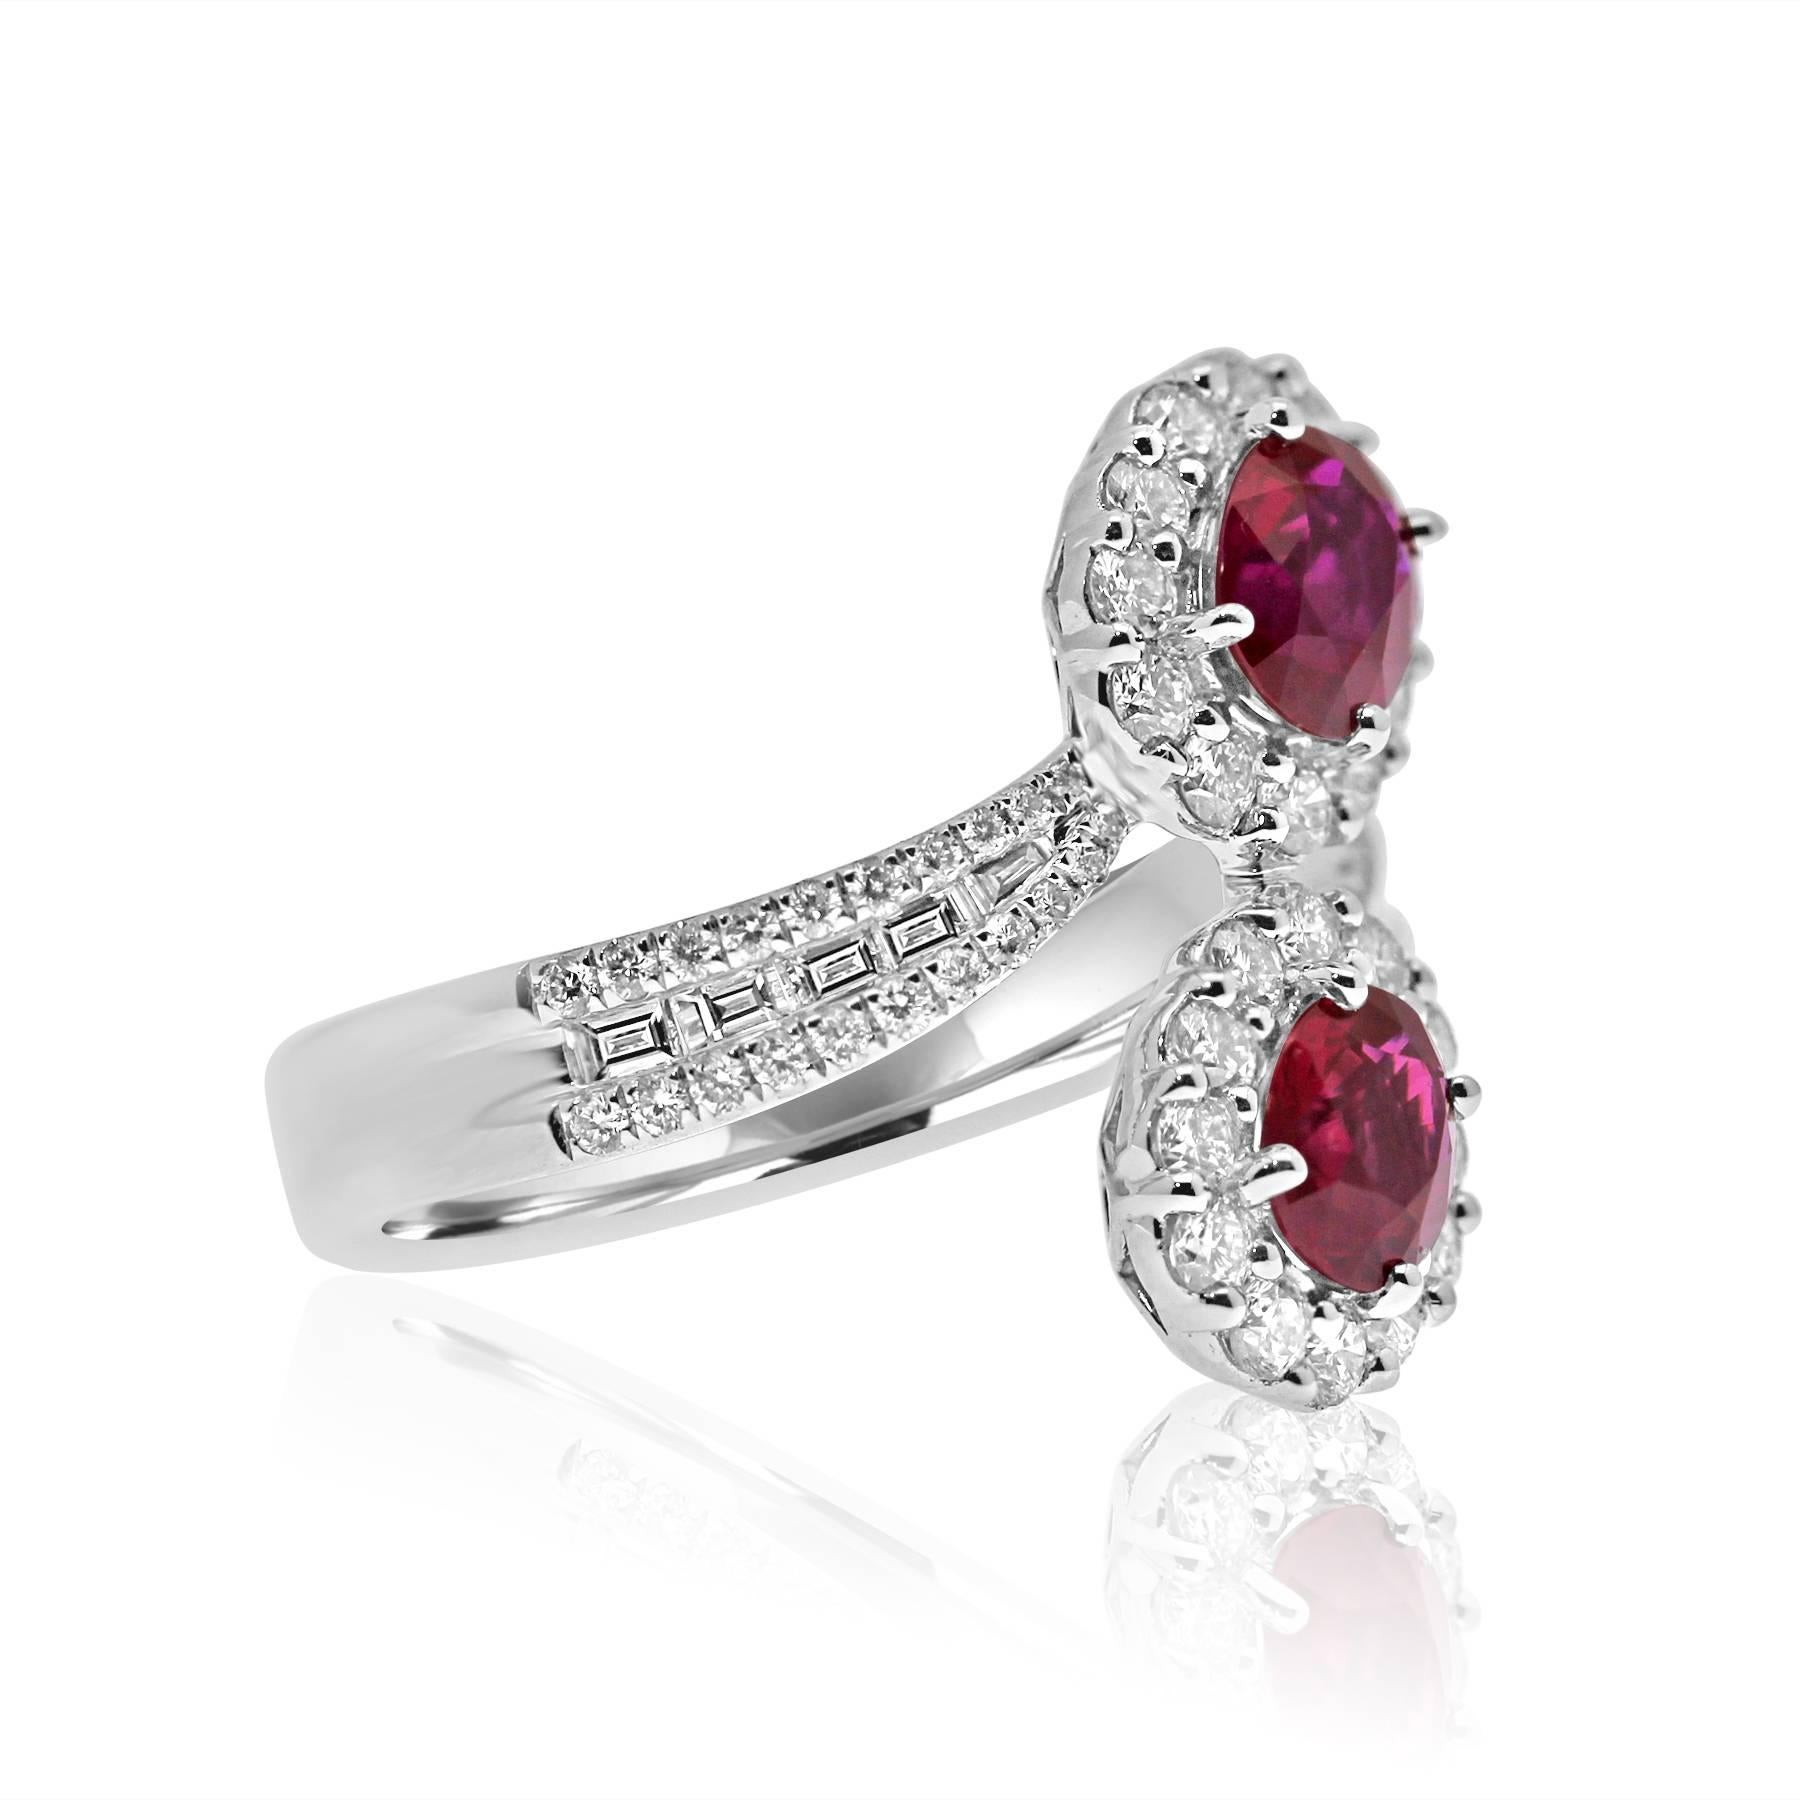 Platinum Toi-et-Moi Ring Set with Diamonds and Ruby gemstones
platinum ring featuring two rubies gemstones of 1.62ct total in a design called toi-et-moi which means me and you together forever.
surrounded by degraded brilliant and baguette cut